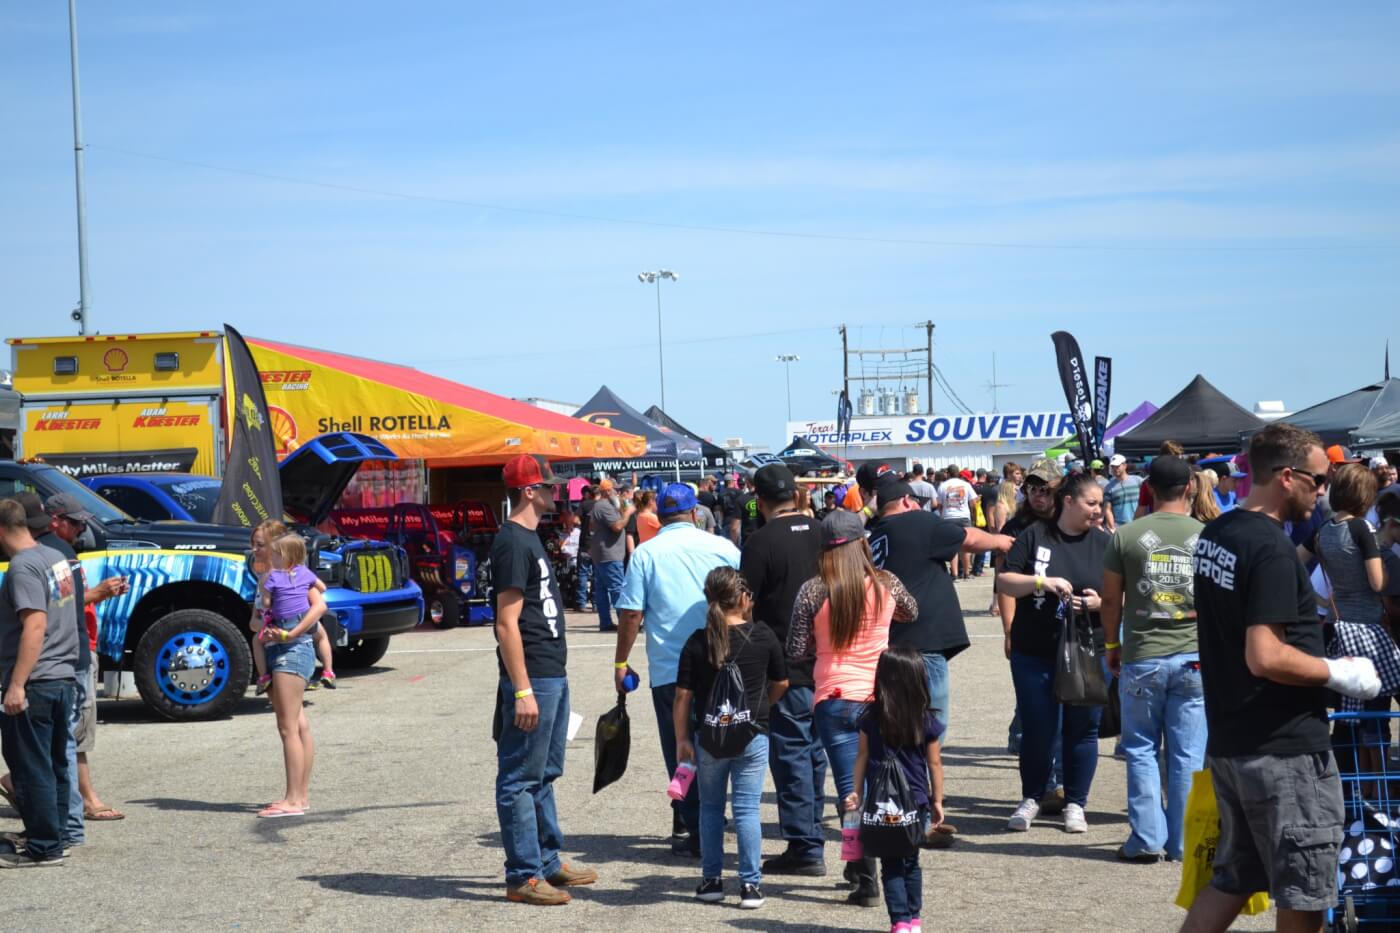 A big part of the World Finals is the Vendor area, which hosts a number of companies who are big on diesel performance. There was BD Power, Shell, Fleece Performance, Suncoast Diesel Transmissions, Pacbrake, Valair, and a host of other companies in attendance with the latest and greatest products designed for diesel pickups.